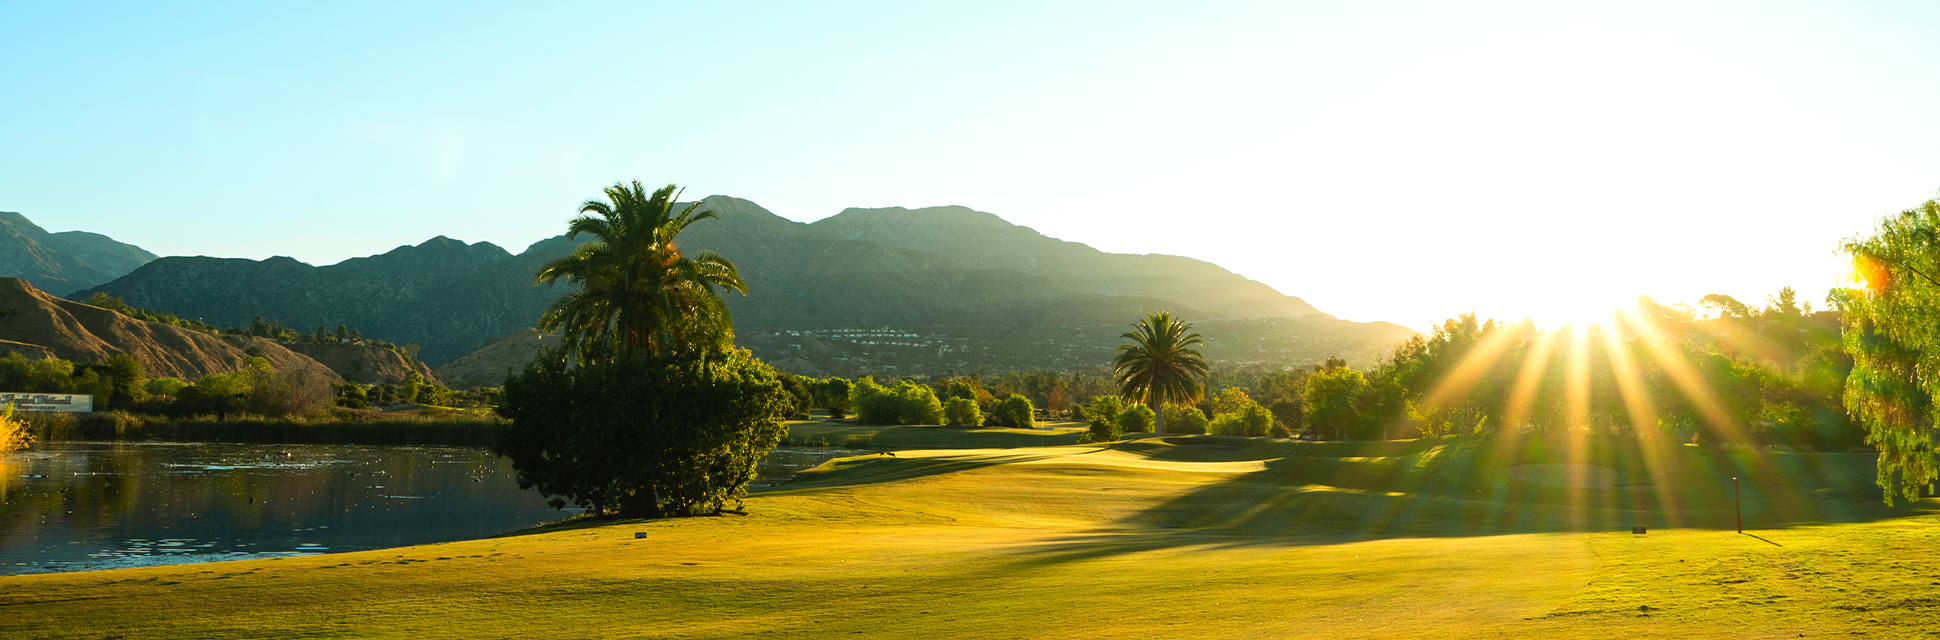 view of golf course green at golden hour